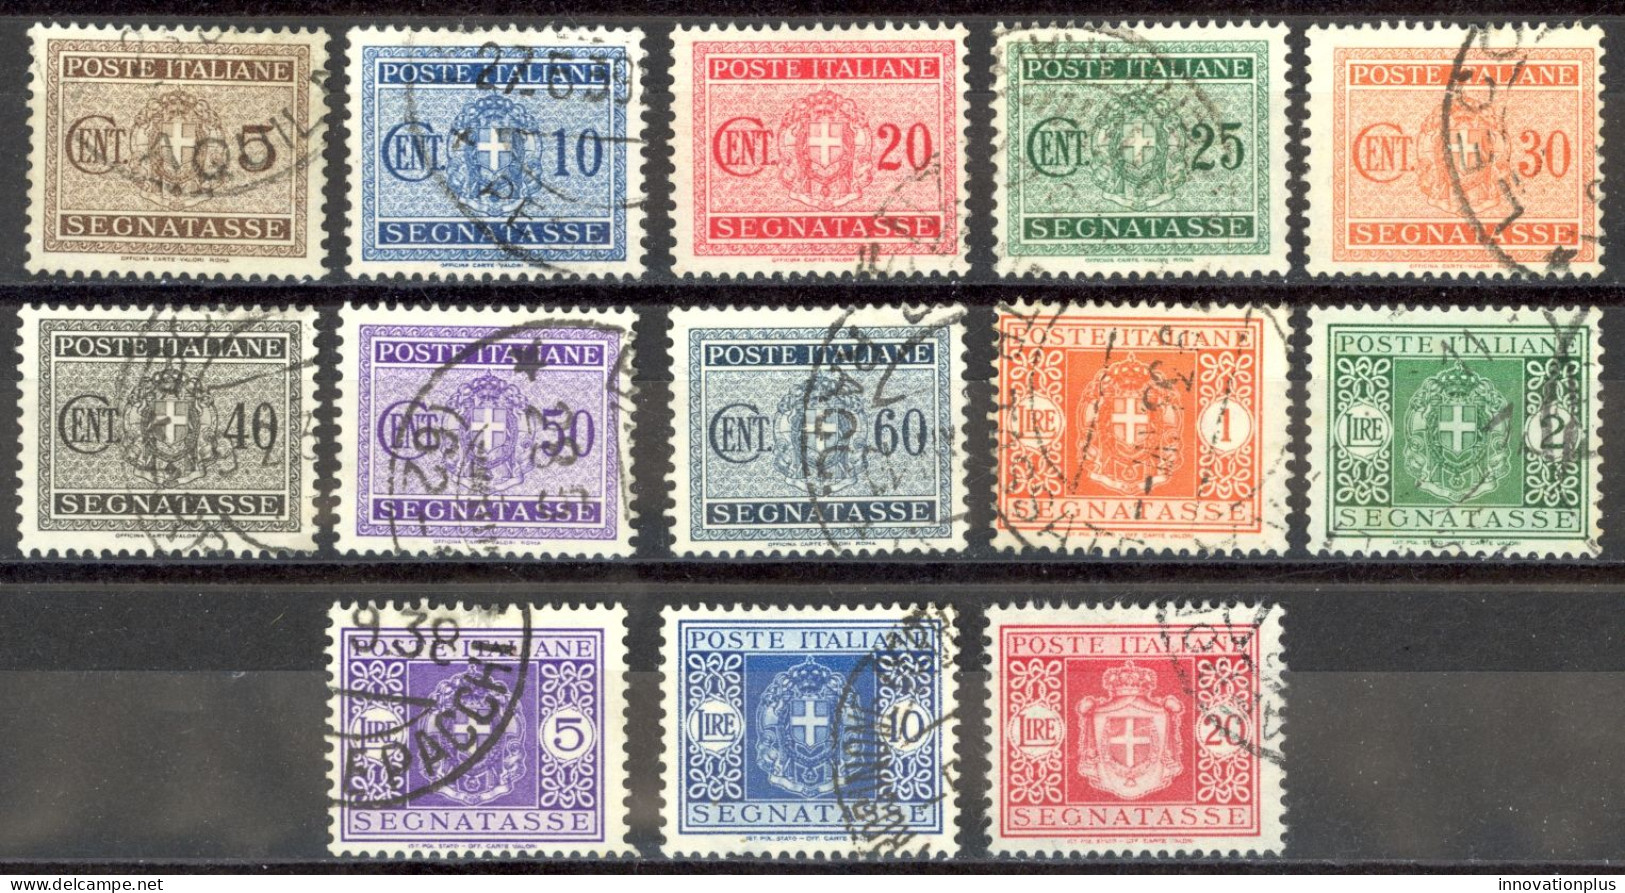 Italy Sc# J28-J40 Used 1934 Postage Due - Postage Due